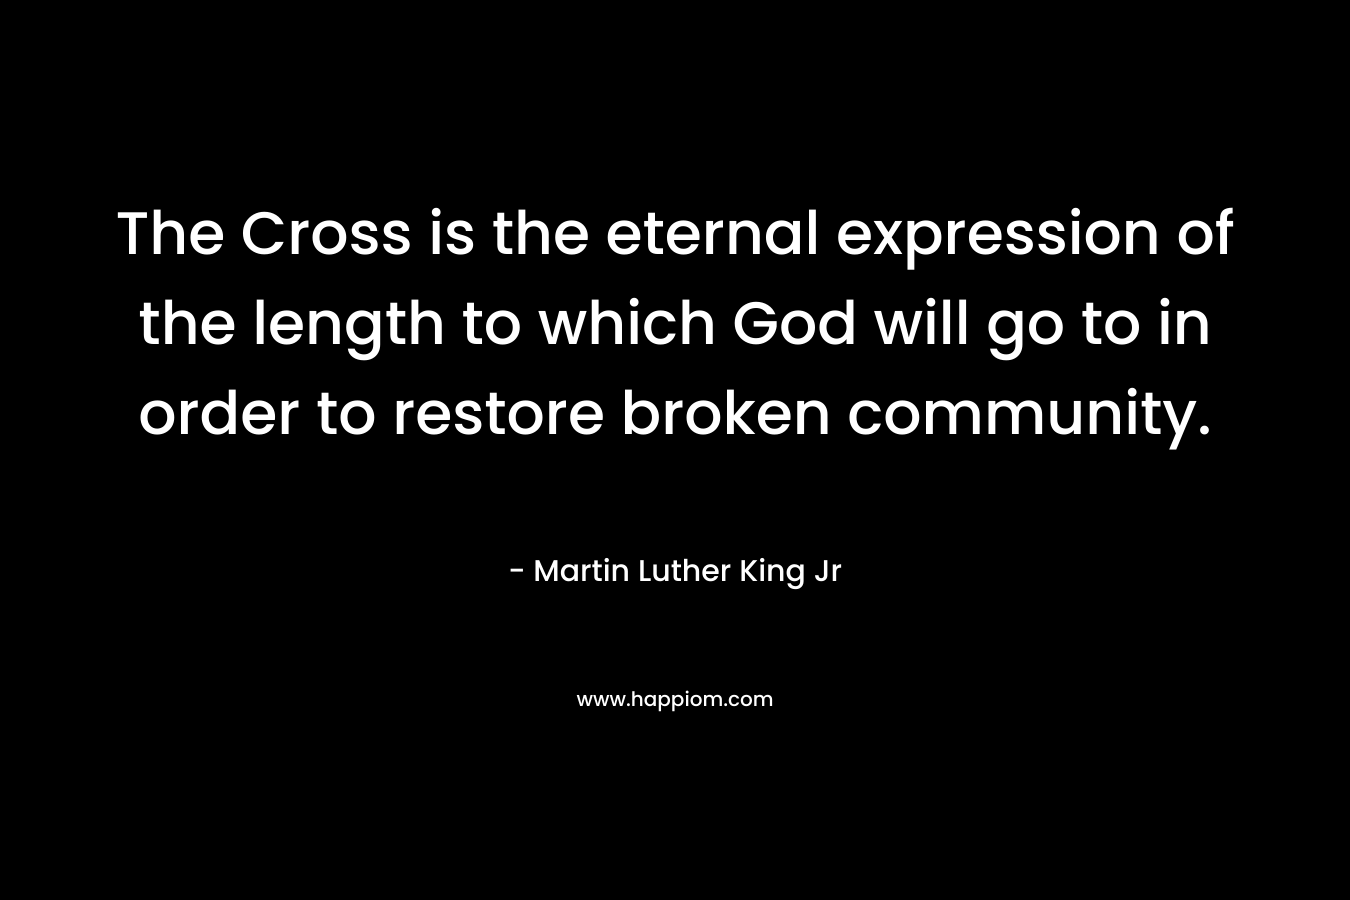 The Cross is the eternal expression of the length to which God will go to in order to restore broken community. – Martin Luther King Jr